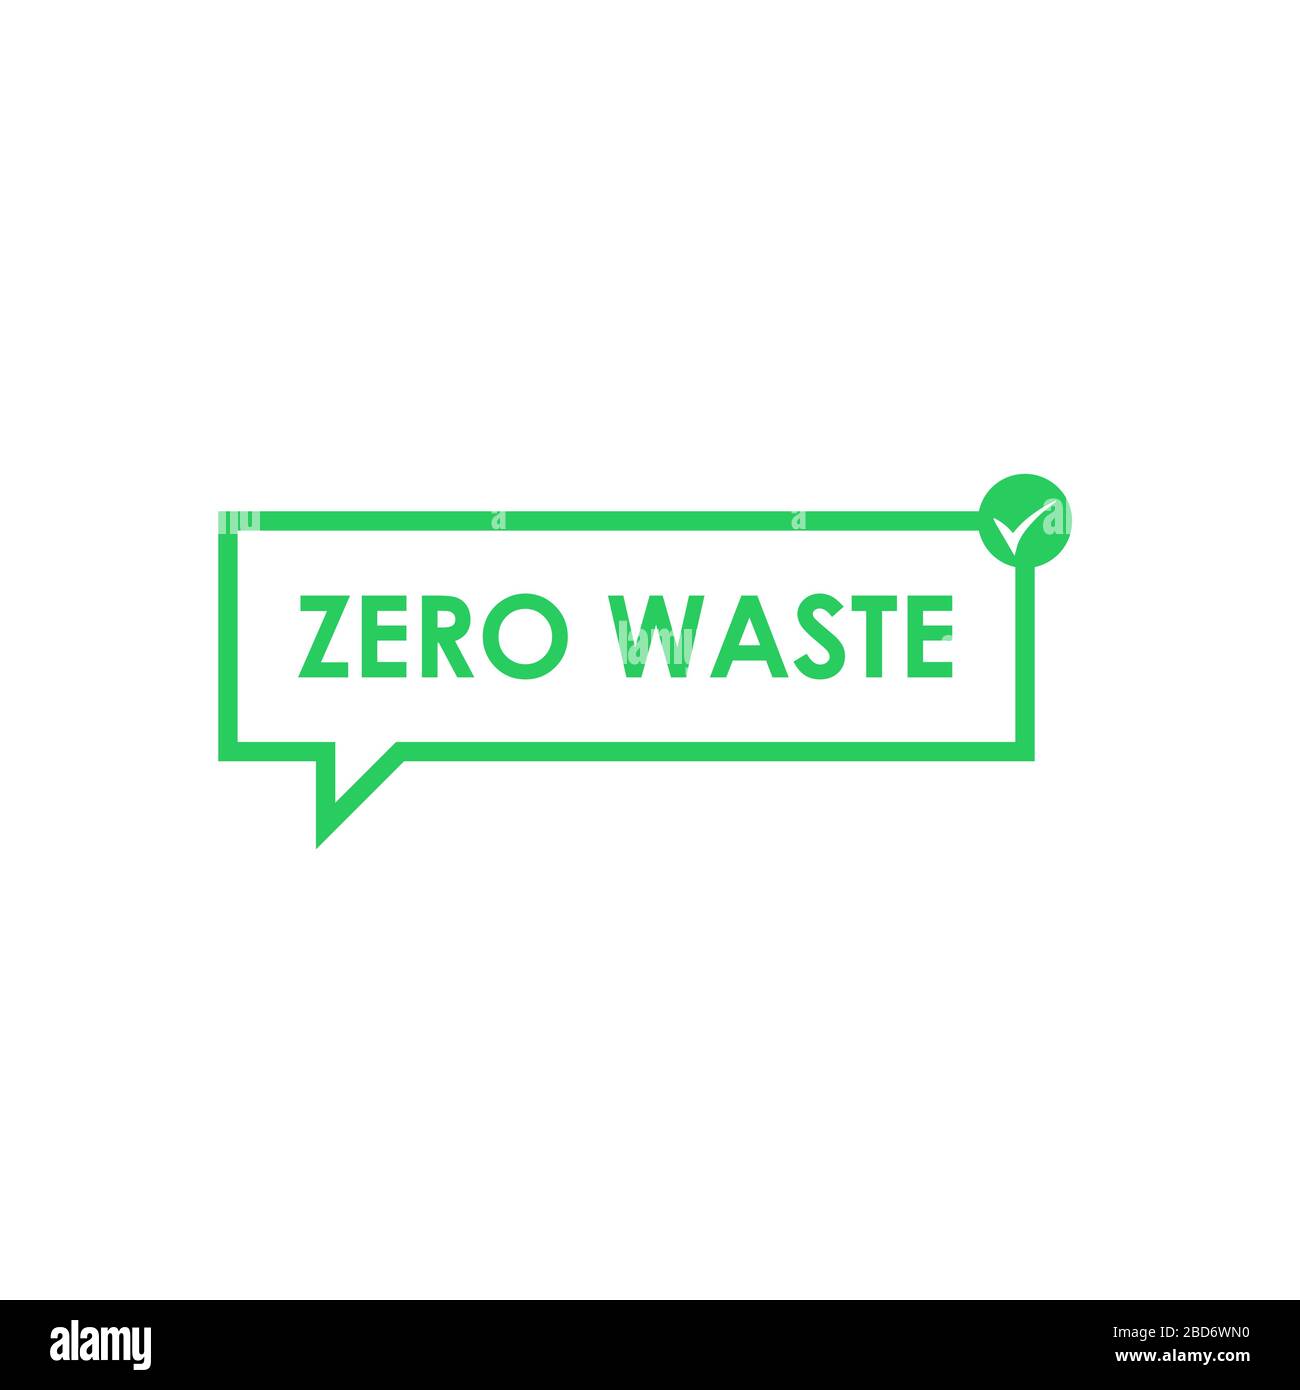 Zero waste message in green chat box with check mark. Eco concept isolated illustration on white background. Vector stock illustration. Stock Vector